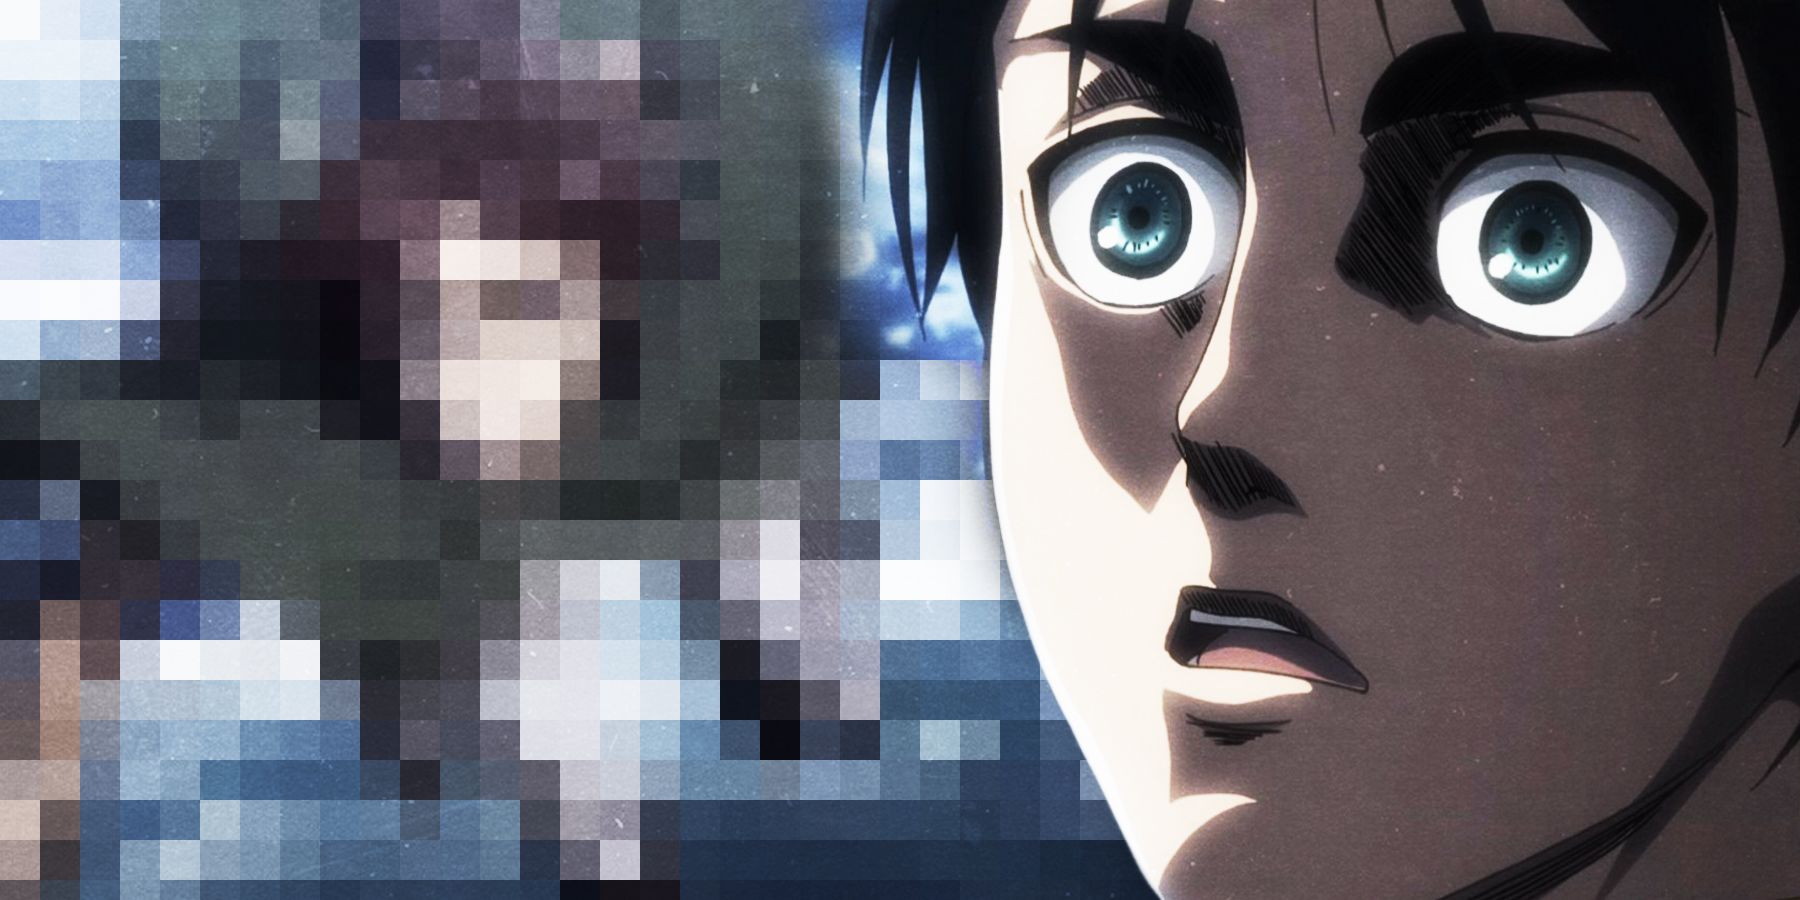 Attack on Titan: The Final Season Part 3 Part 2: Major spoilers to expect